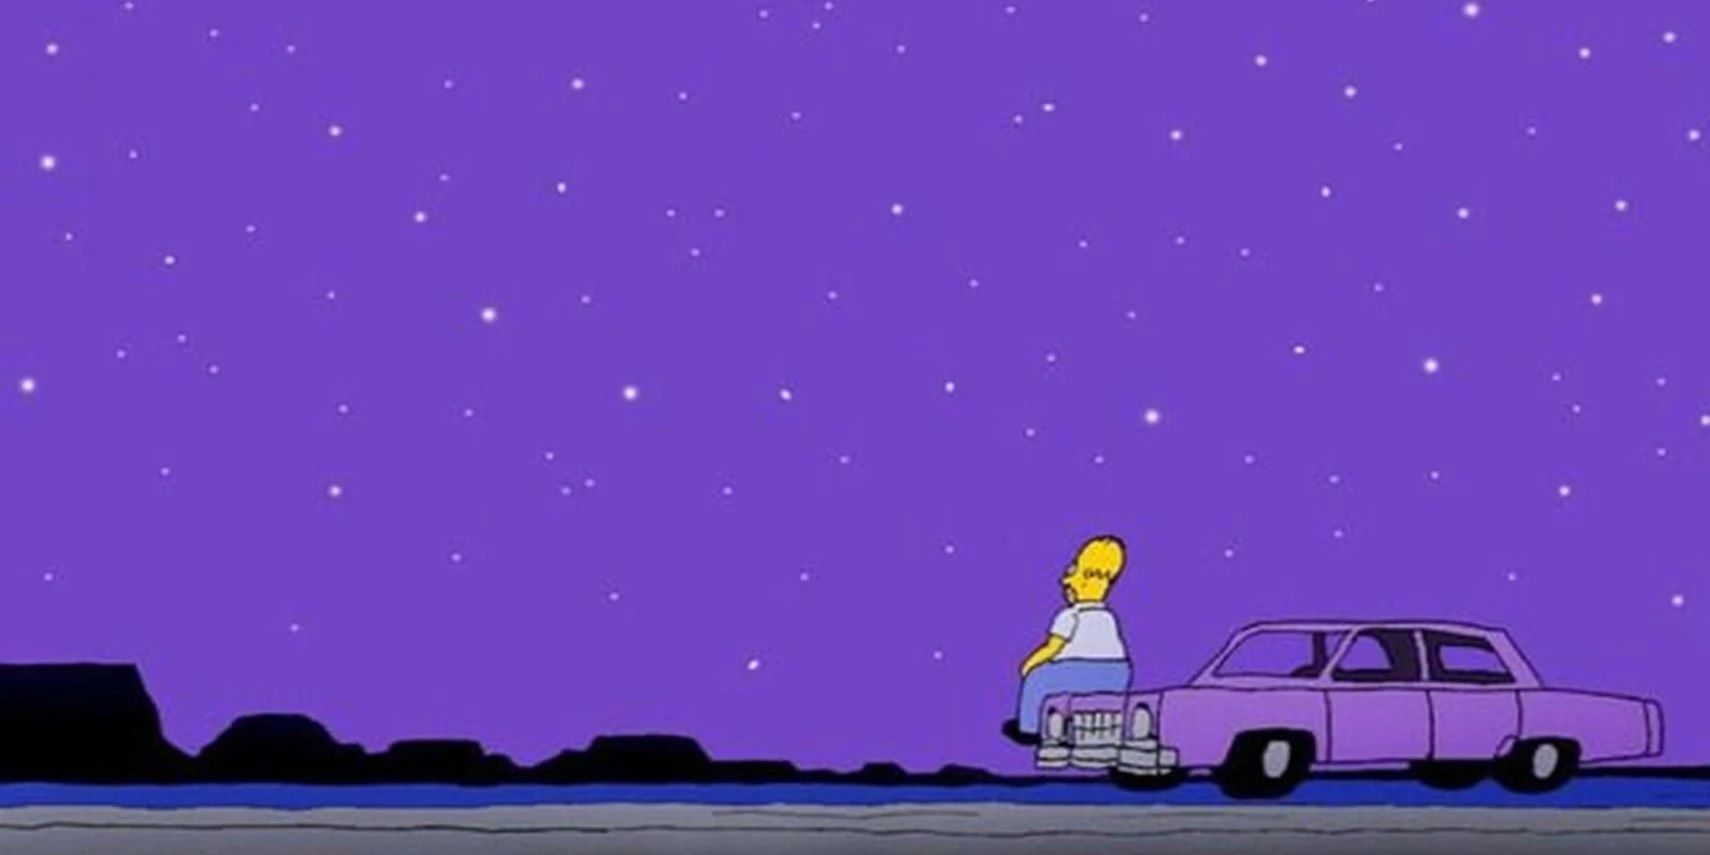 Homer sits on his car and looks up at the sky in The Simpsons